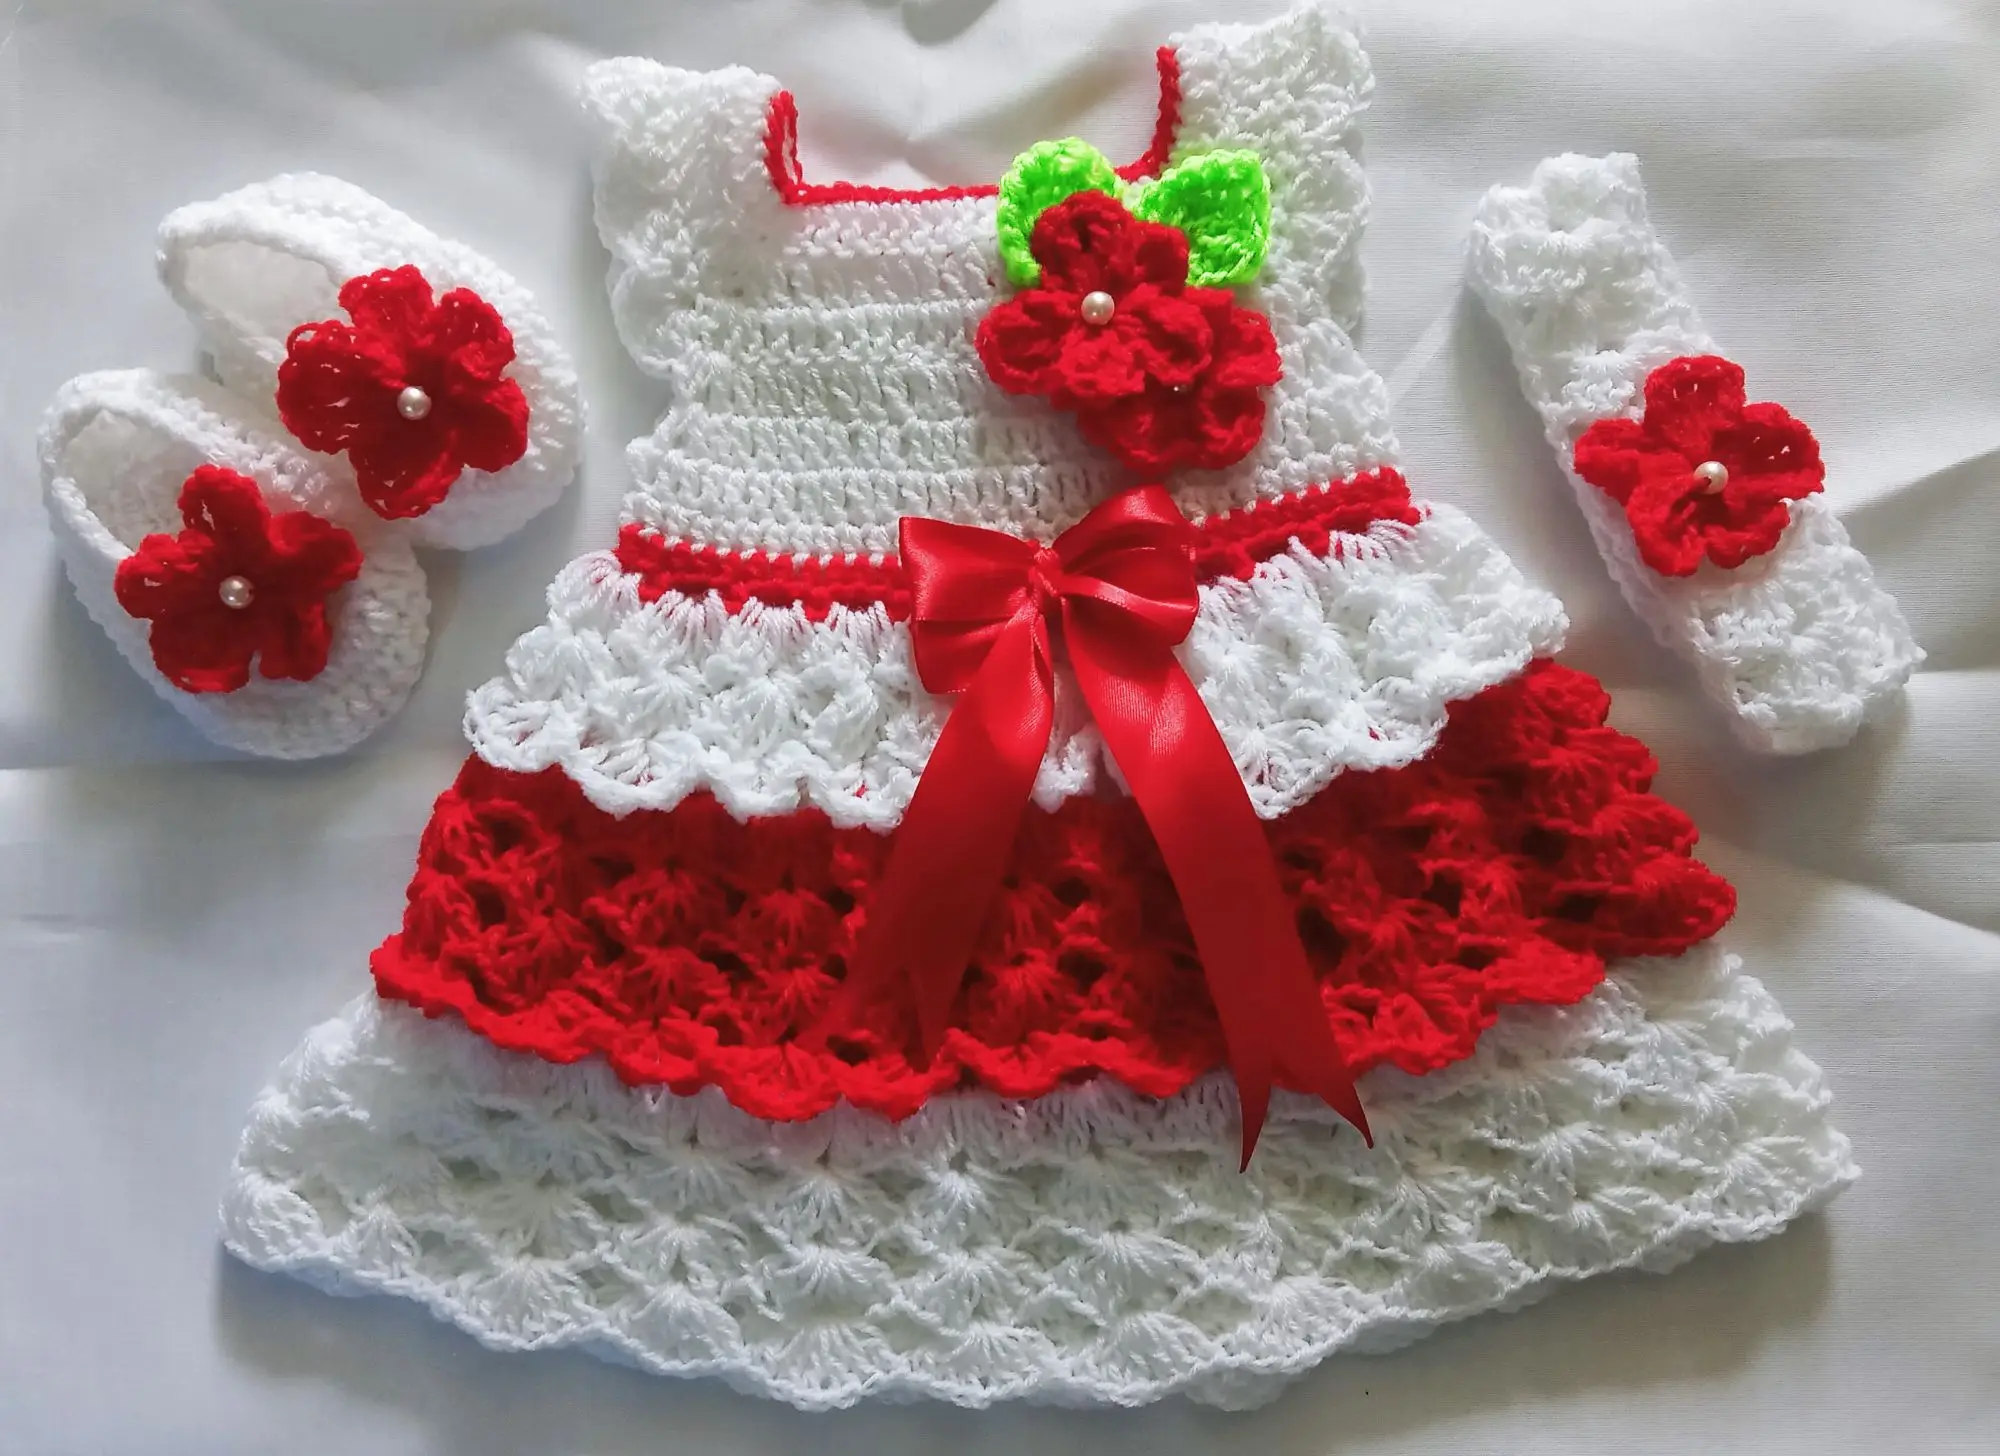 Amazon.com: WOOLEN DRESS FOR BABY GIRL OF 18 TO 24 MONTH : Handmade Products